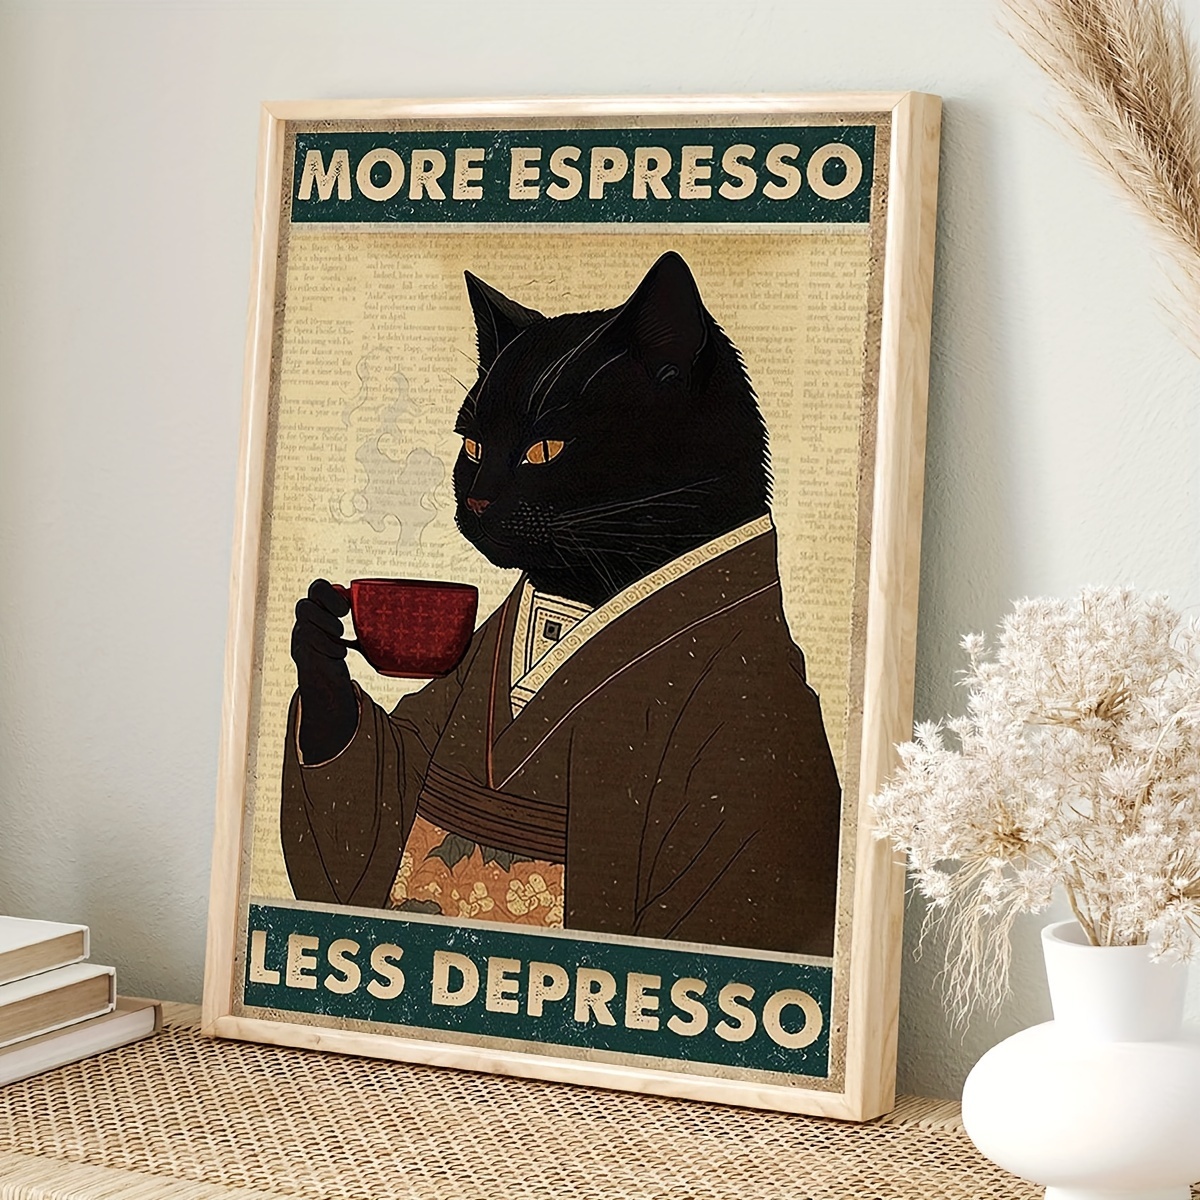 

More Espresso Less Depresso, Coffee Shop Art Work, A Black Cat Was Drinking Coffee, A Gift For Your Friend, Fit For Bar Club Pub Decoration Poster, Wall Art Canvas Painting, Ready To Hang (has Framed)